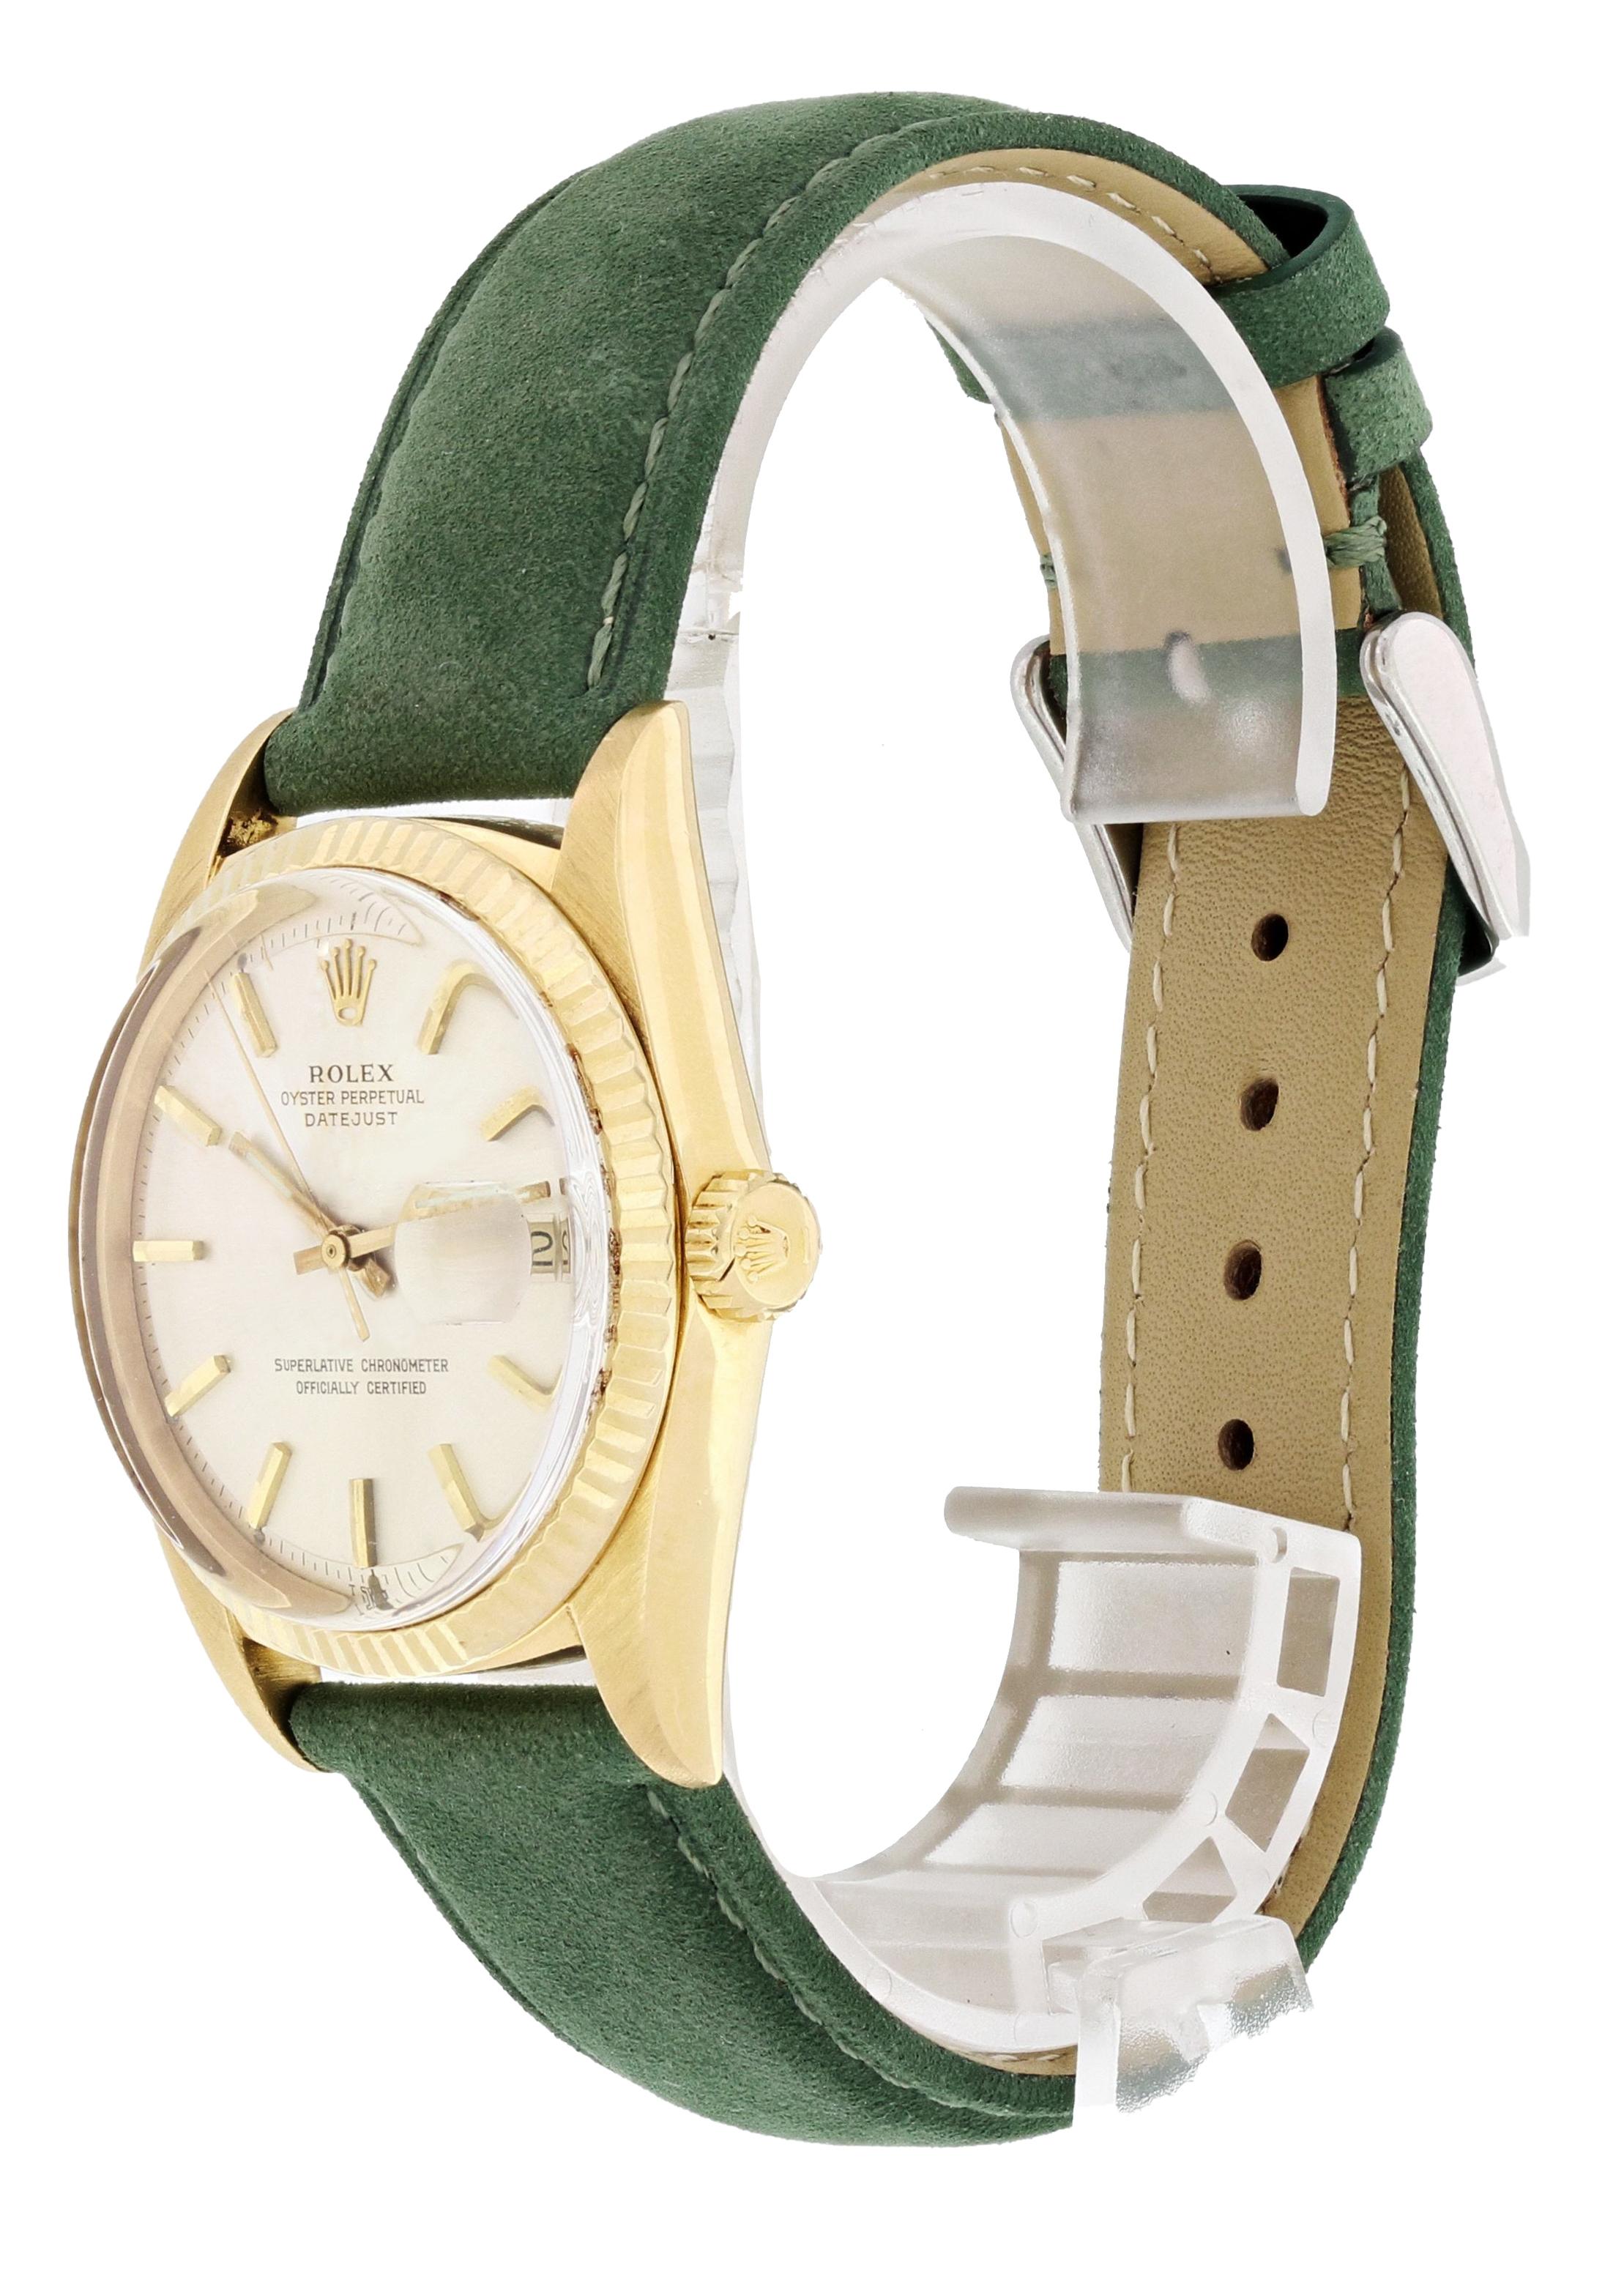 Rolex Oyster Perpetual Datejust 1601 Mens Watch. 36mm 18k yellow gold case with a fluted bezel. Champagne dial with gold hands and index hour markers. Minute markers around the outer dial. Date display at the 3 o'clock position. Green suede leather